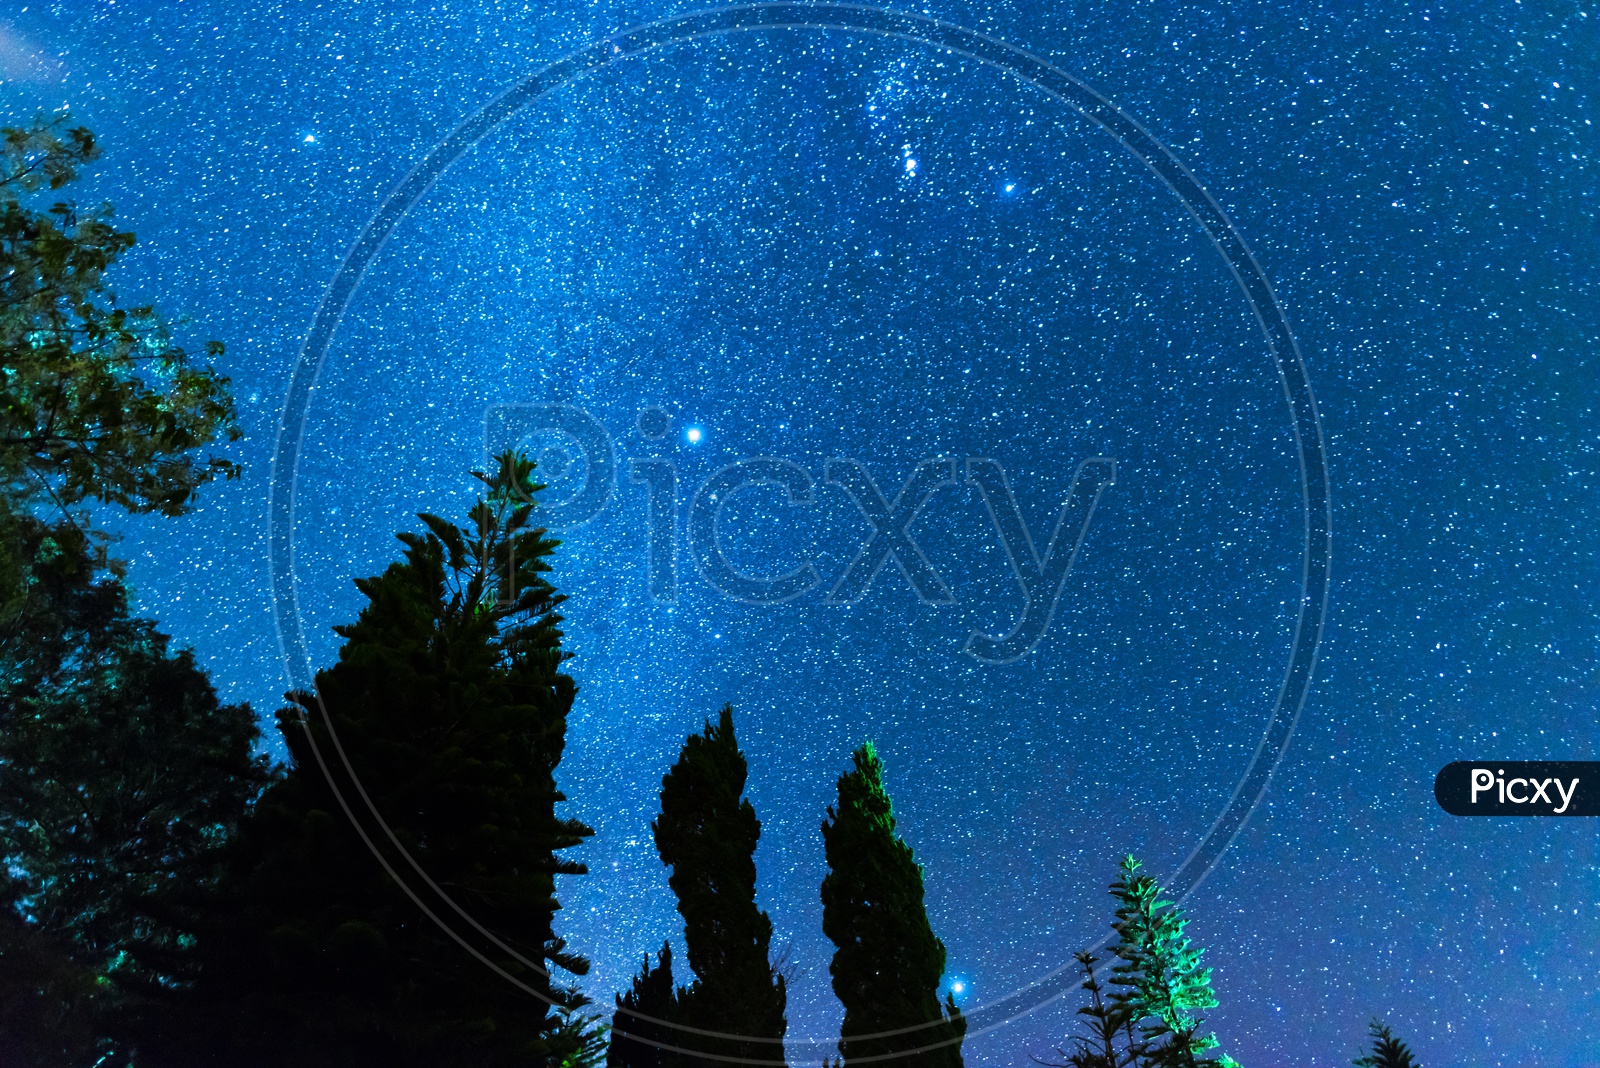 A milky way sky with pine tree forest in Thailand